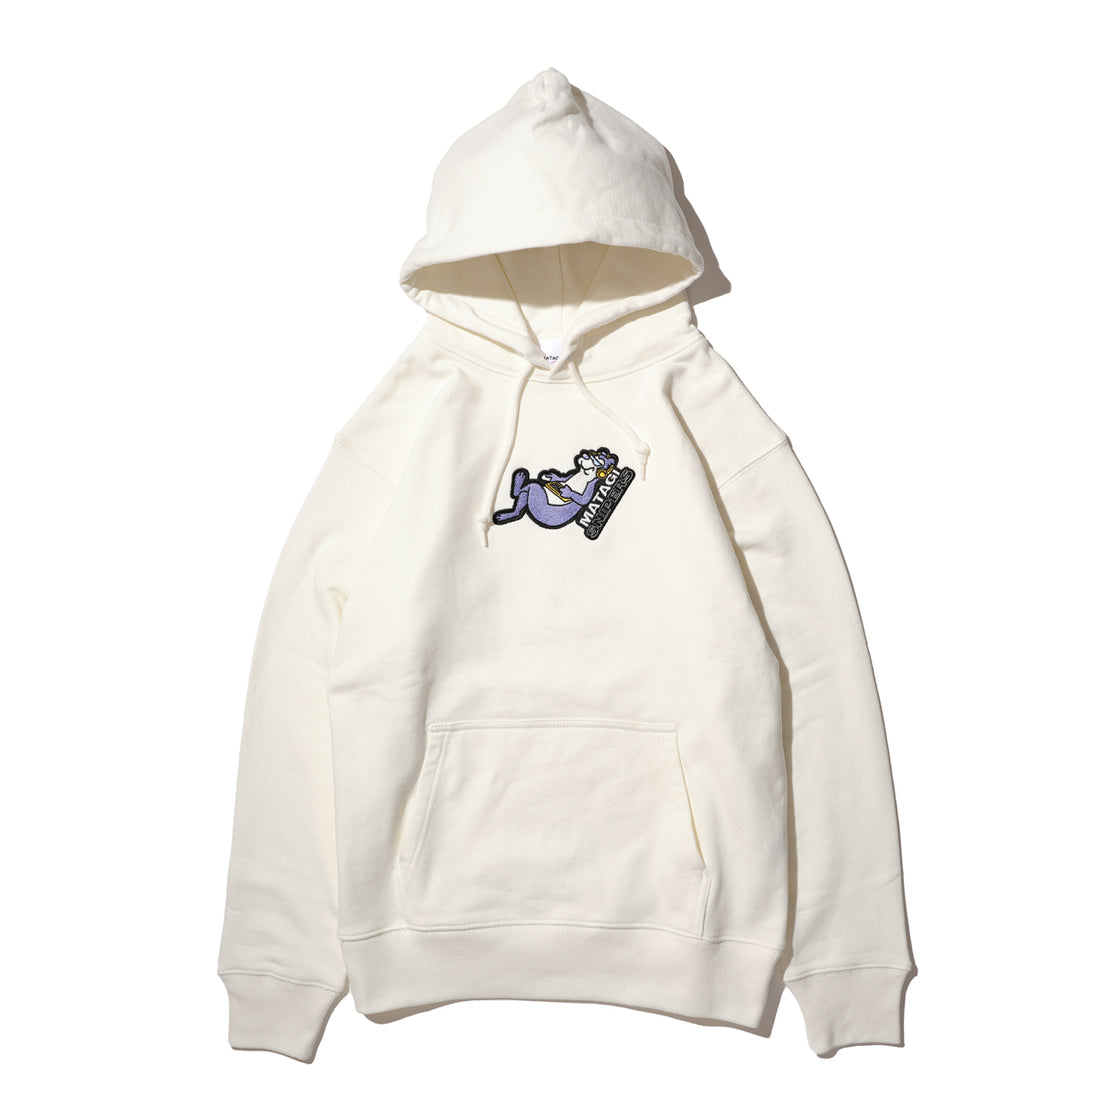 "THE BEAR playing games" Hoodie